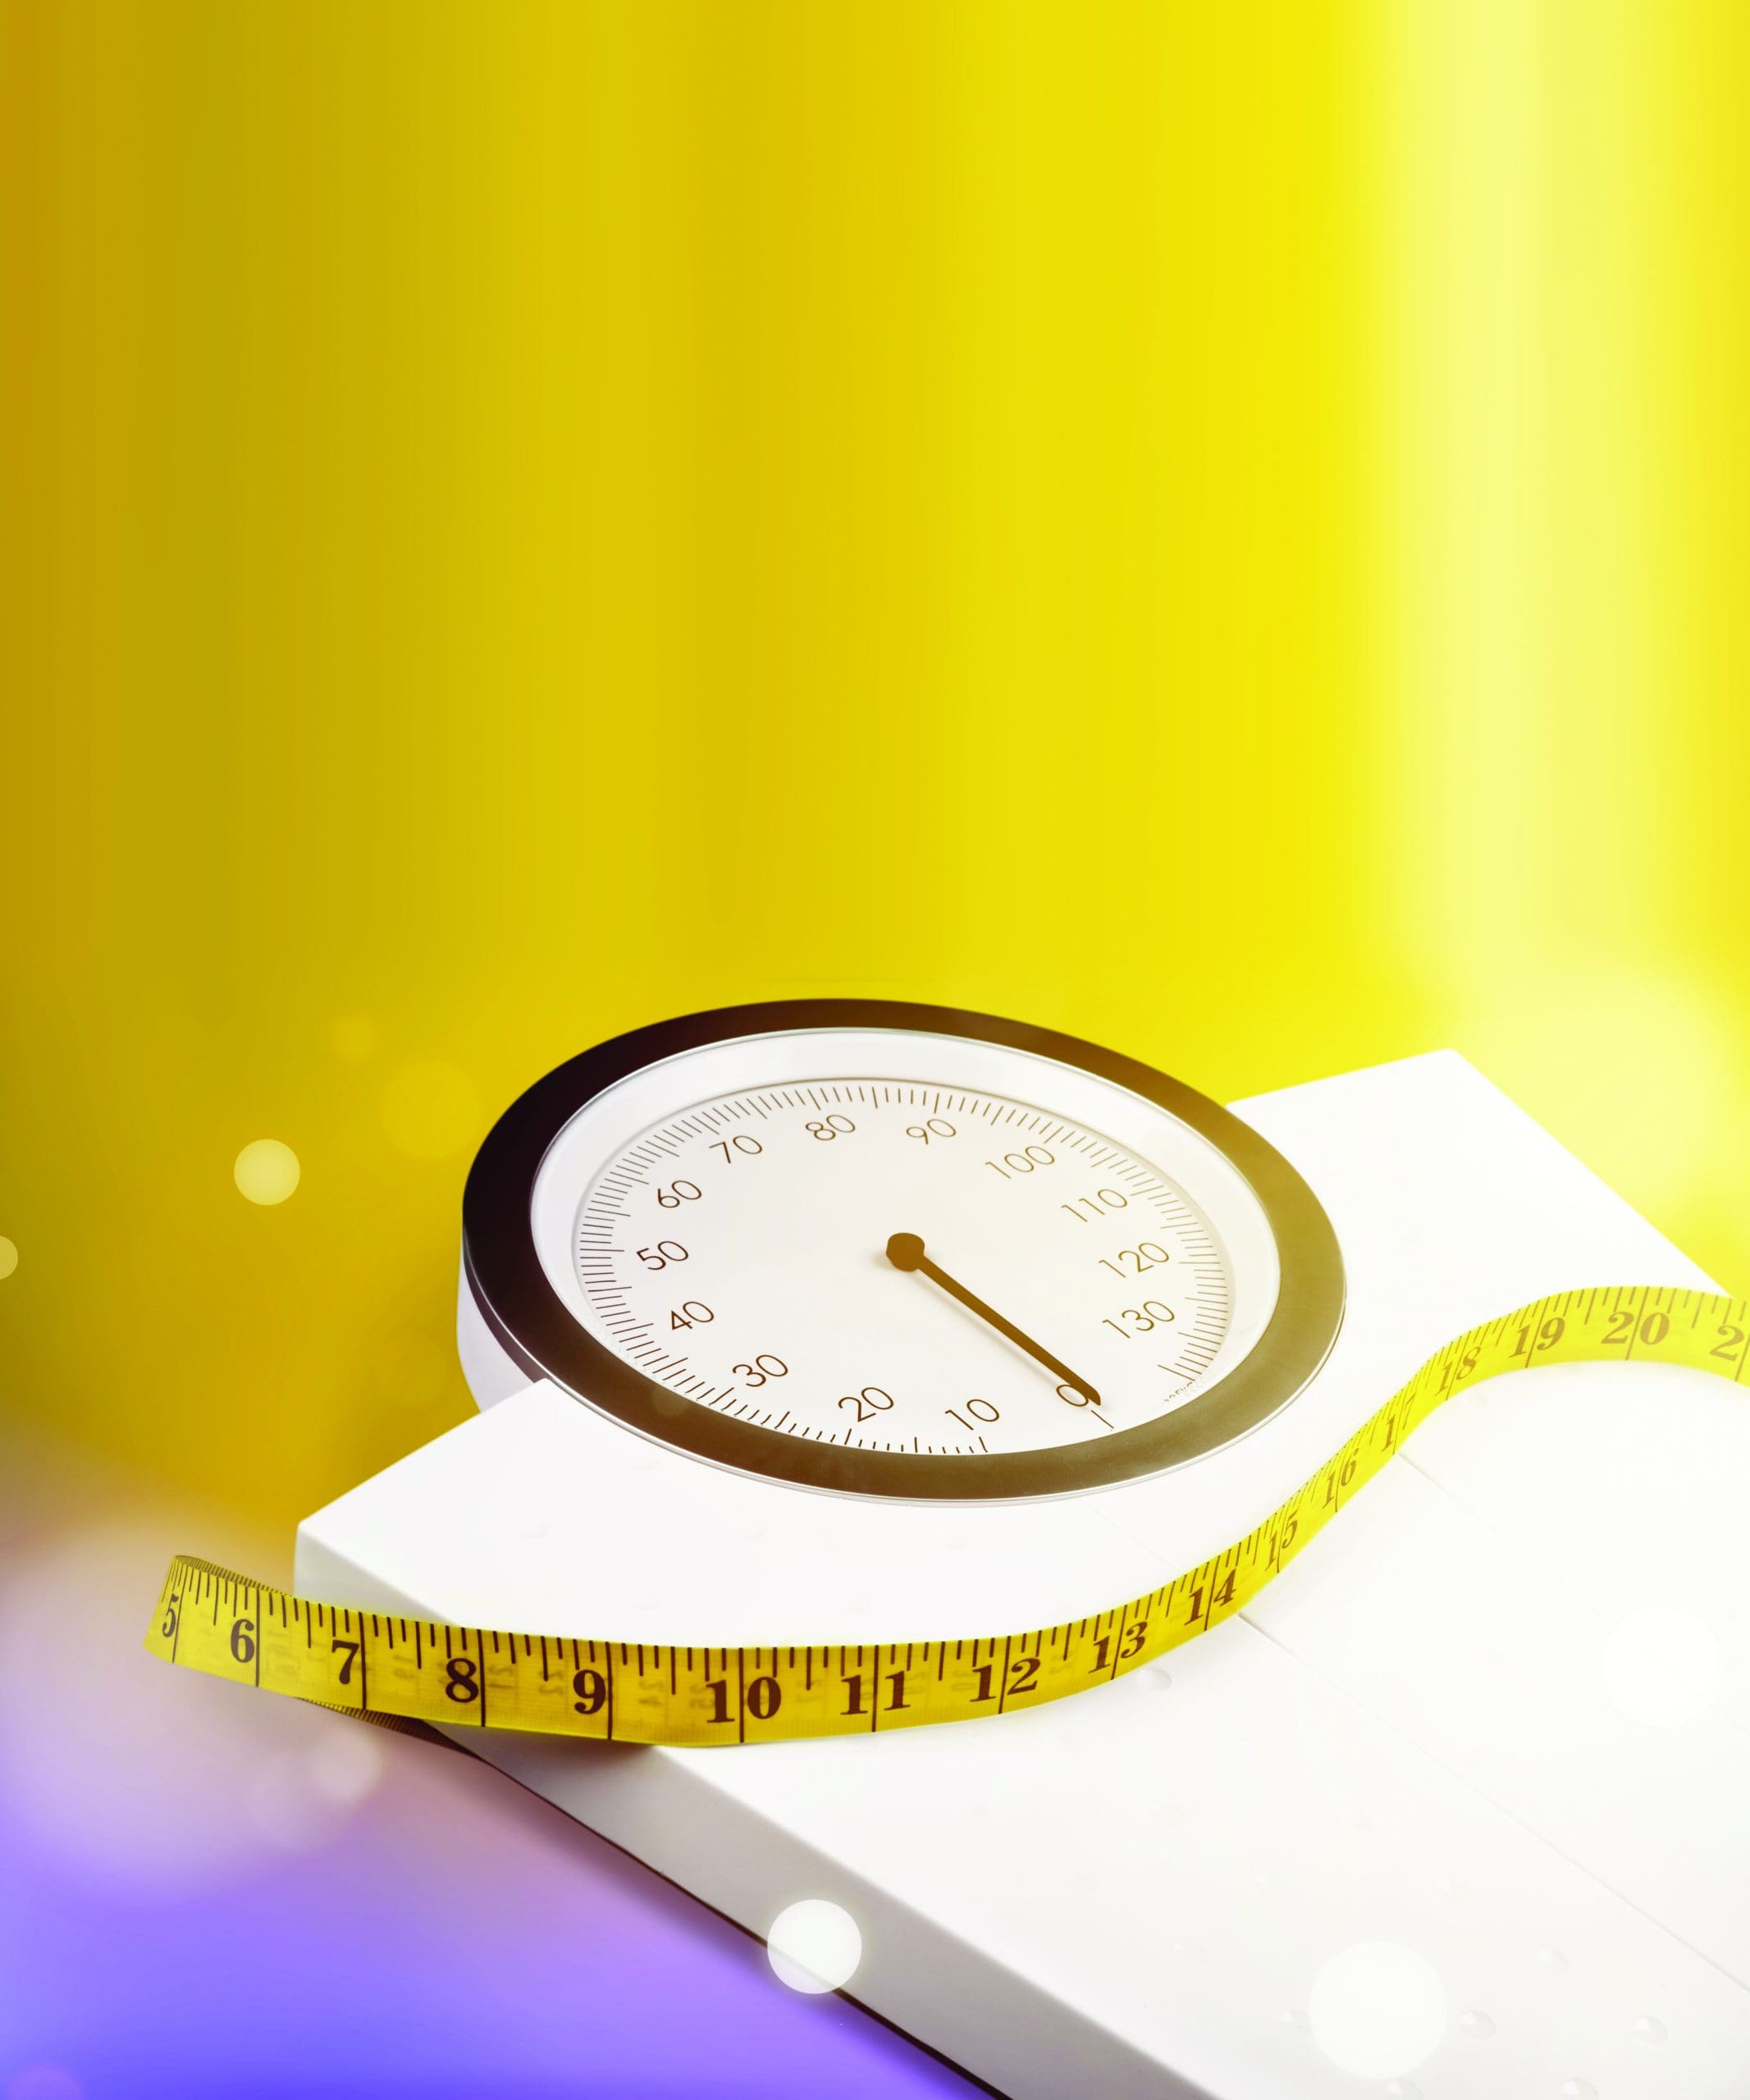 Measuring Obesity, Obesity Prevention Source